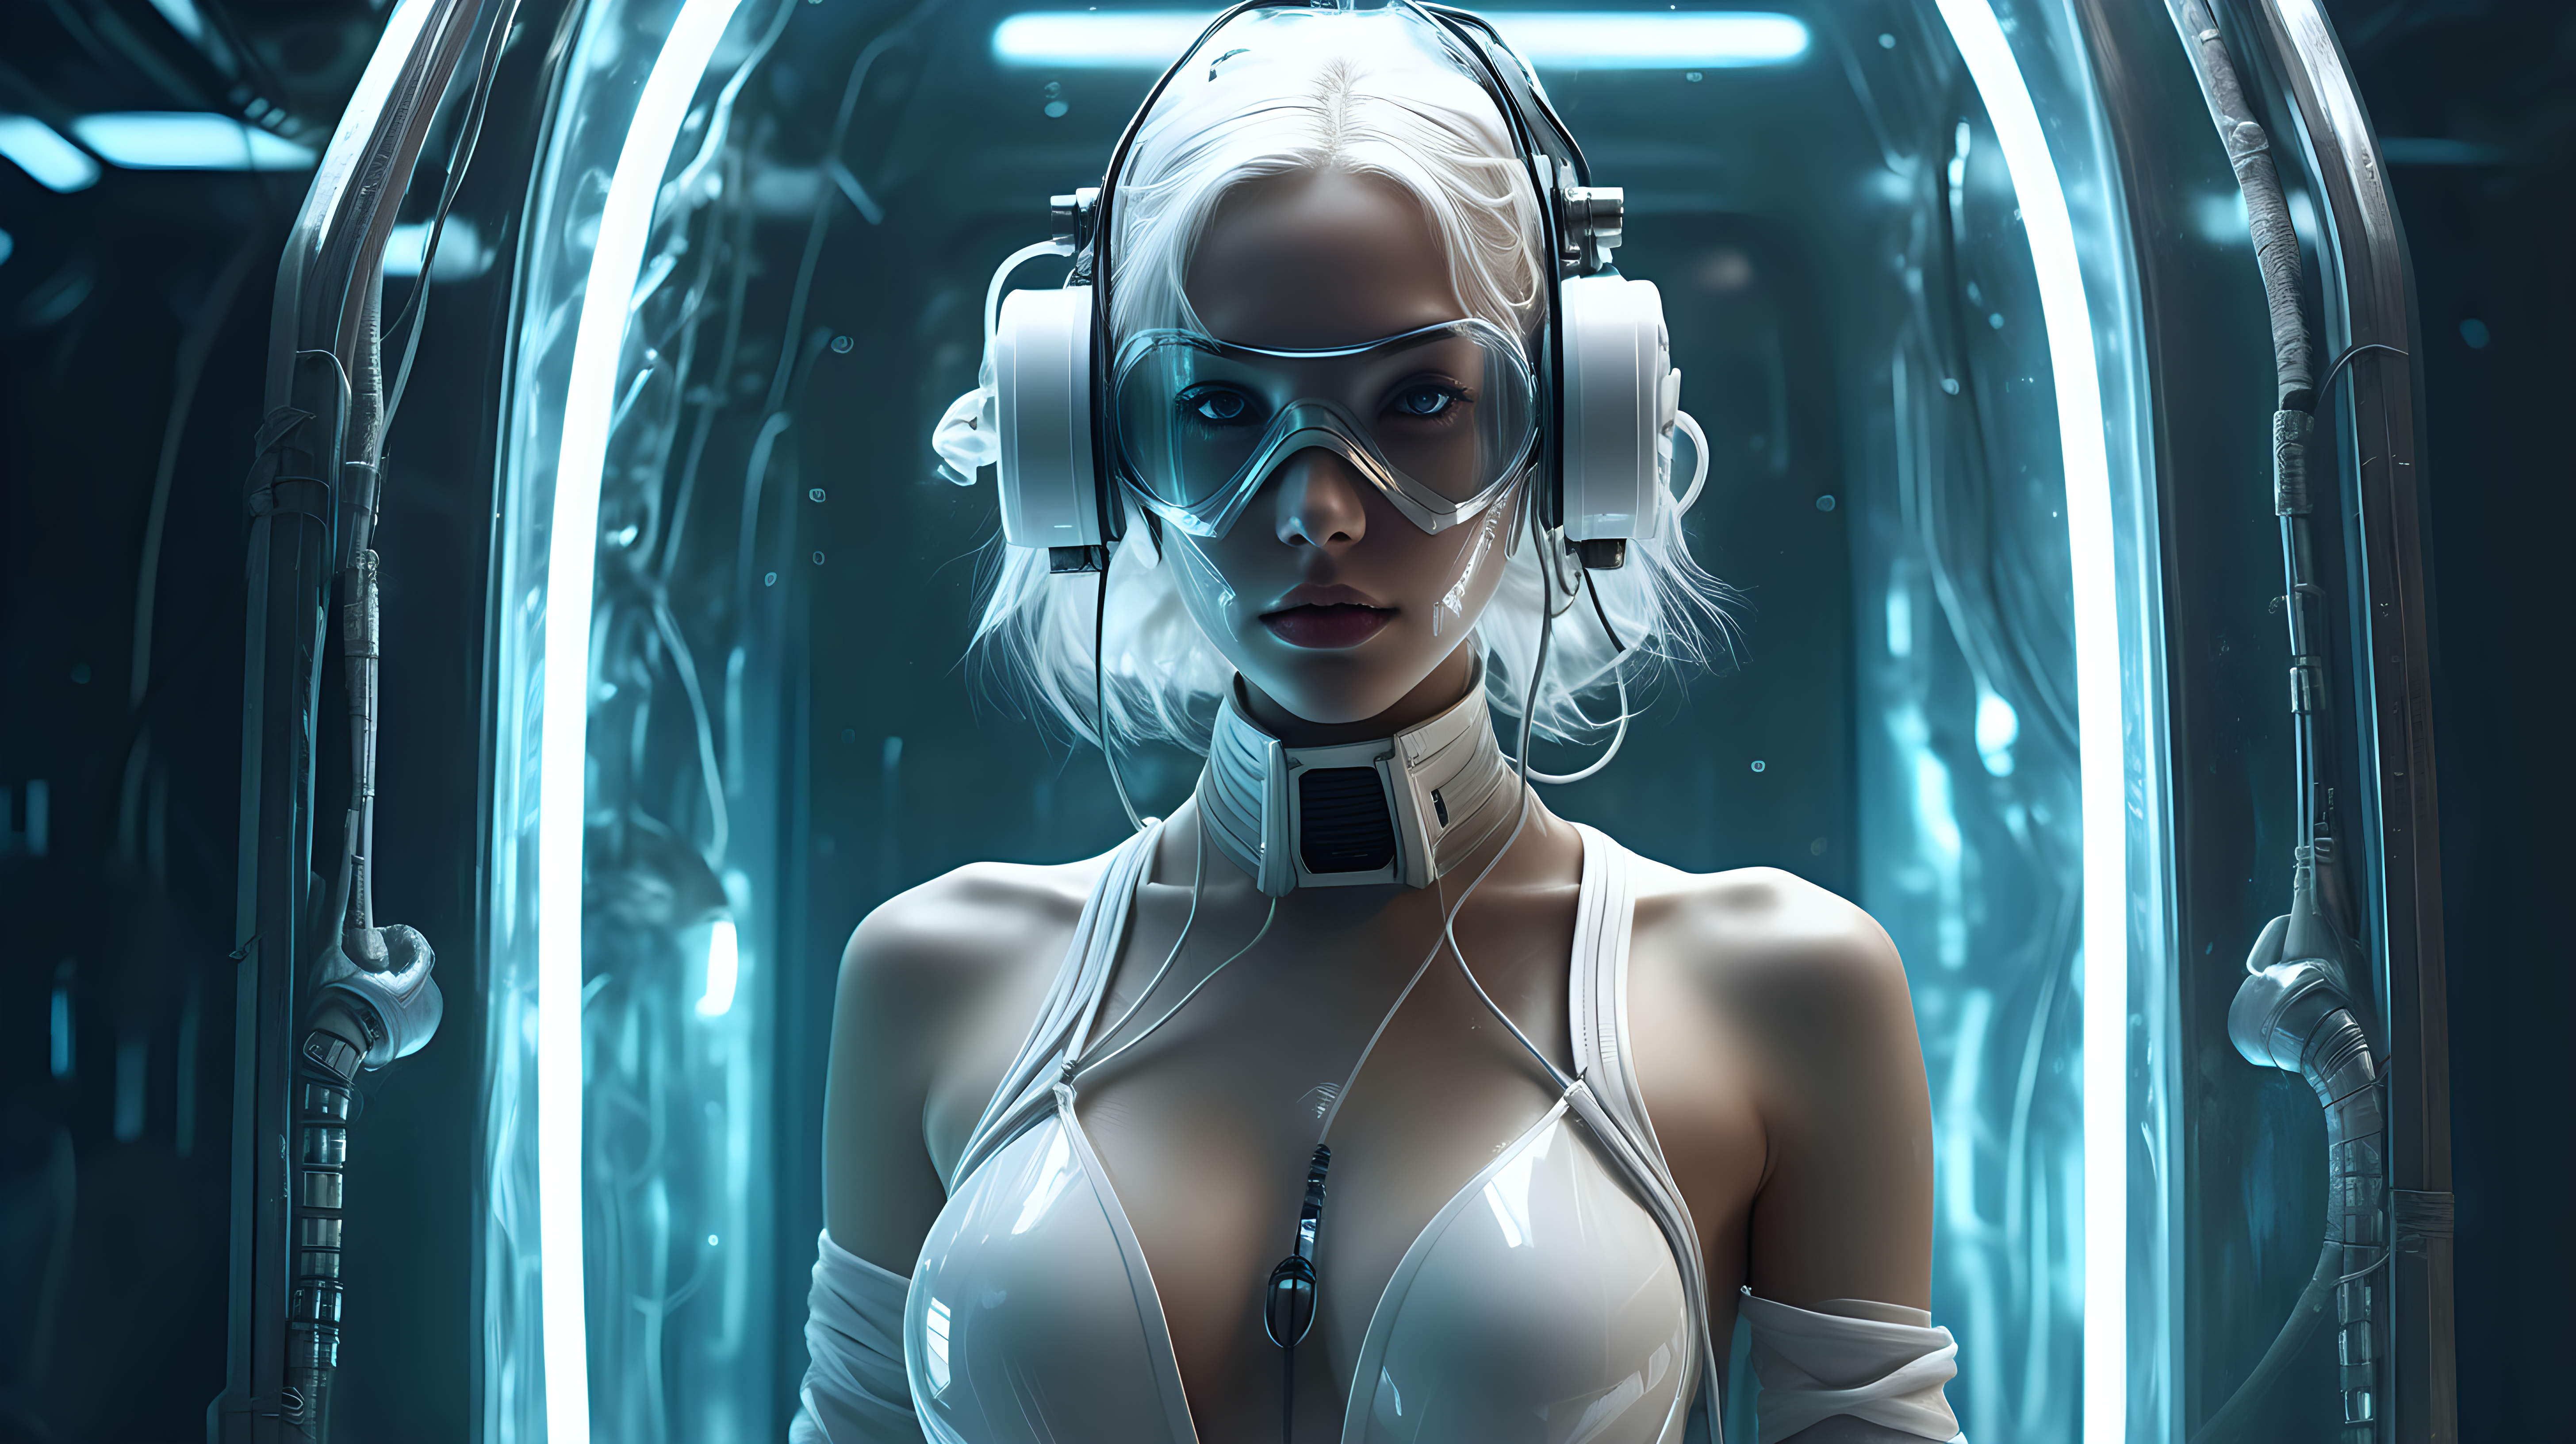 digital art, best quality, ultra realistic, ultimate detailed, sci-fi, centered composition, full-length body cinematic shot: stunning futuristic cyberpunk female, bandages cloathing, floating fully immersed and wired in a futuristic vertical healing chamber, underwater, sci-fi respirator mask, clear white eyes, detailed glass reflection, perfect woman forms, asymmetric white hair, gorgeous face, detailed natural skin, natural texture, diffused soft lighting